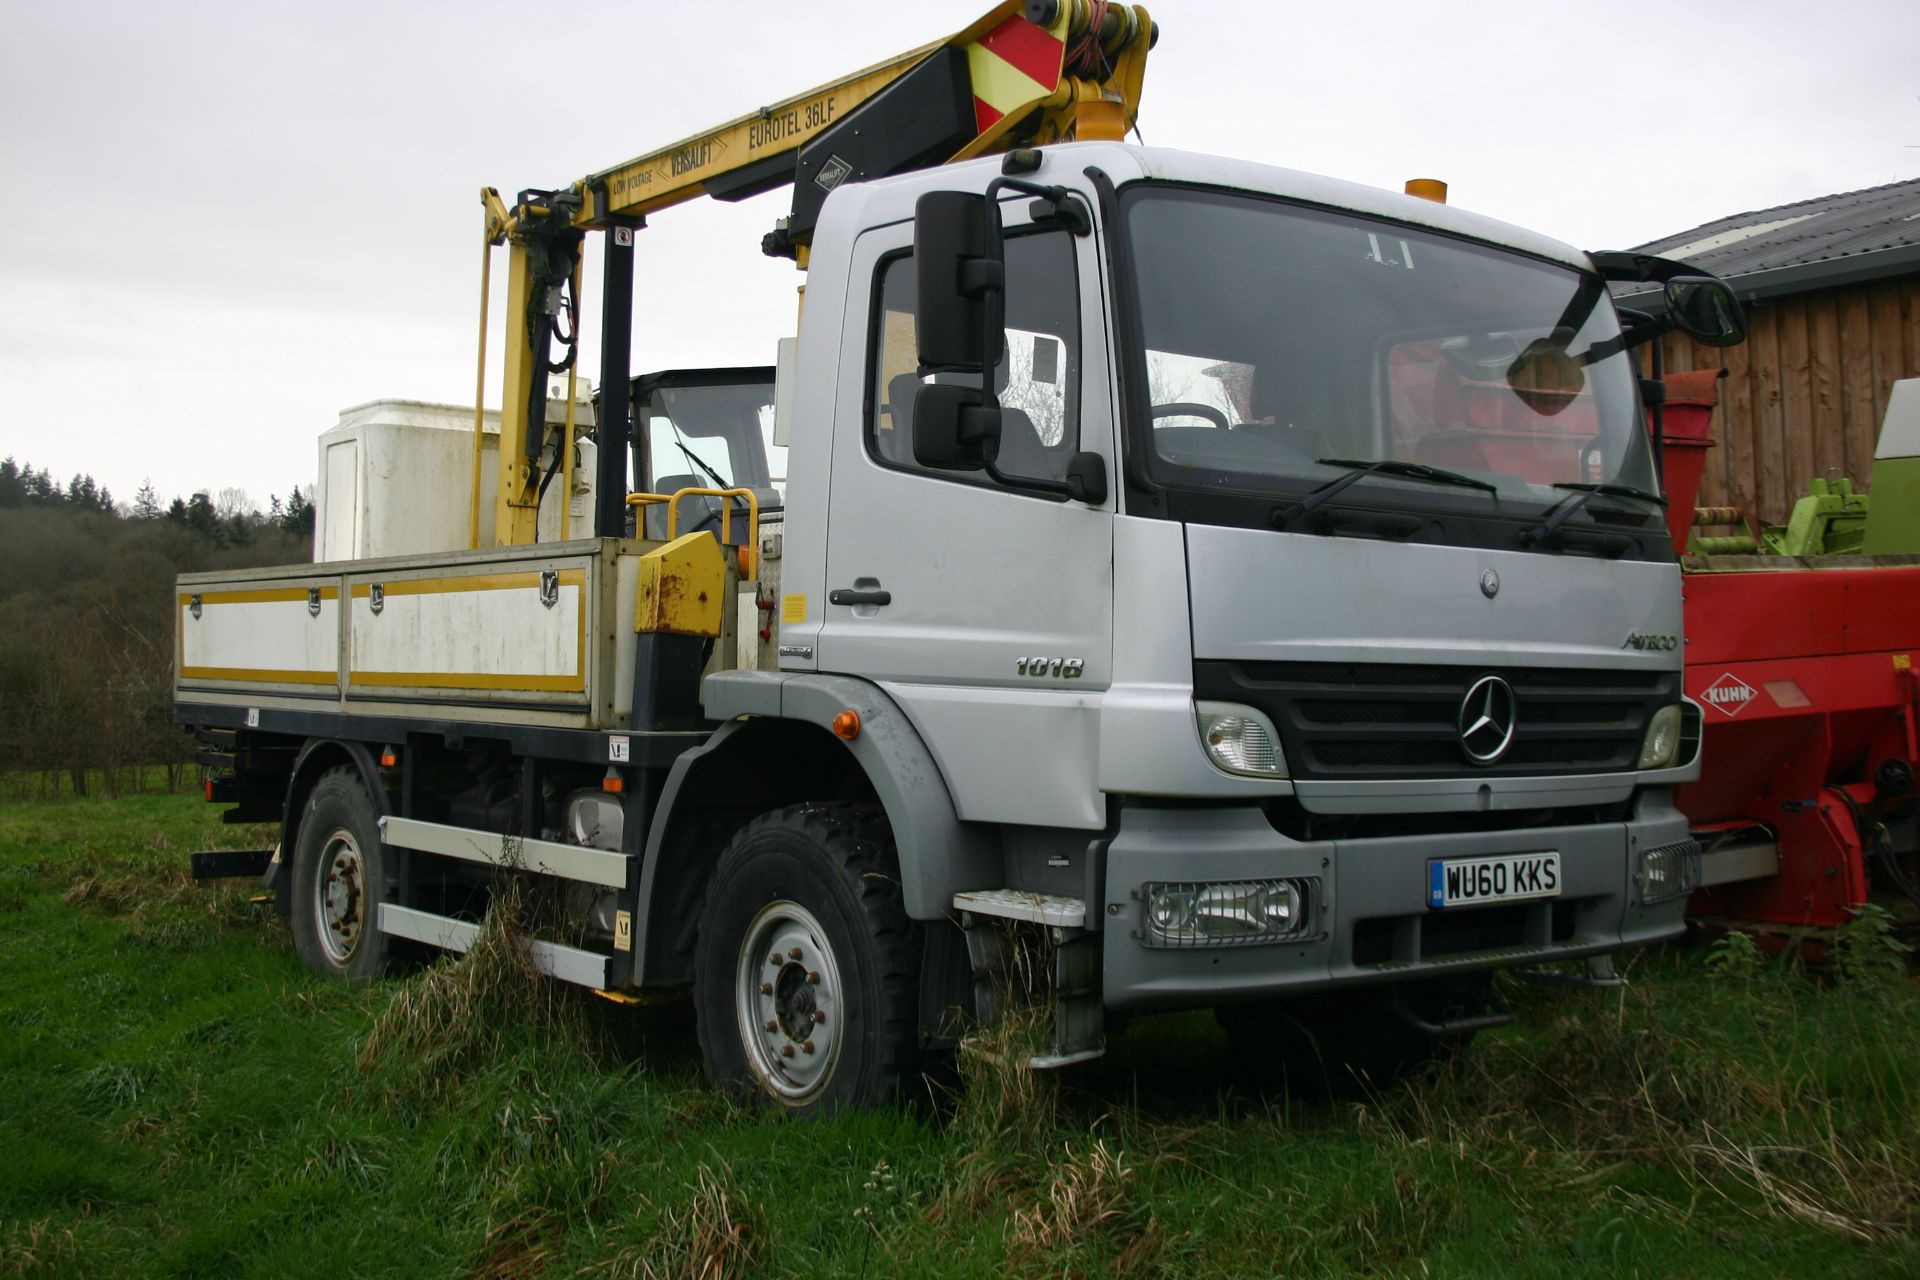 2011/60 REG MERCEDES ATEGO 1018 BLUETEC S 4.3 DIESEL 4WD TOWER WAGON, SHOWING 0 FORMER KEEPERS